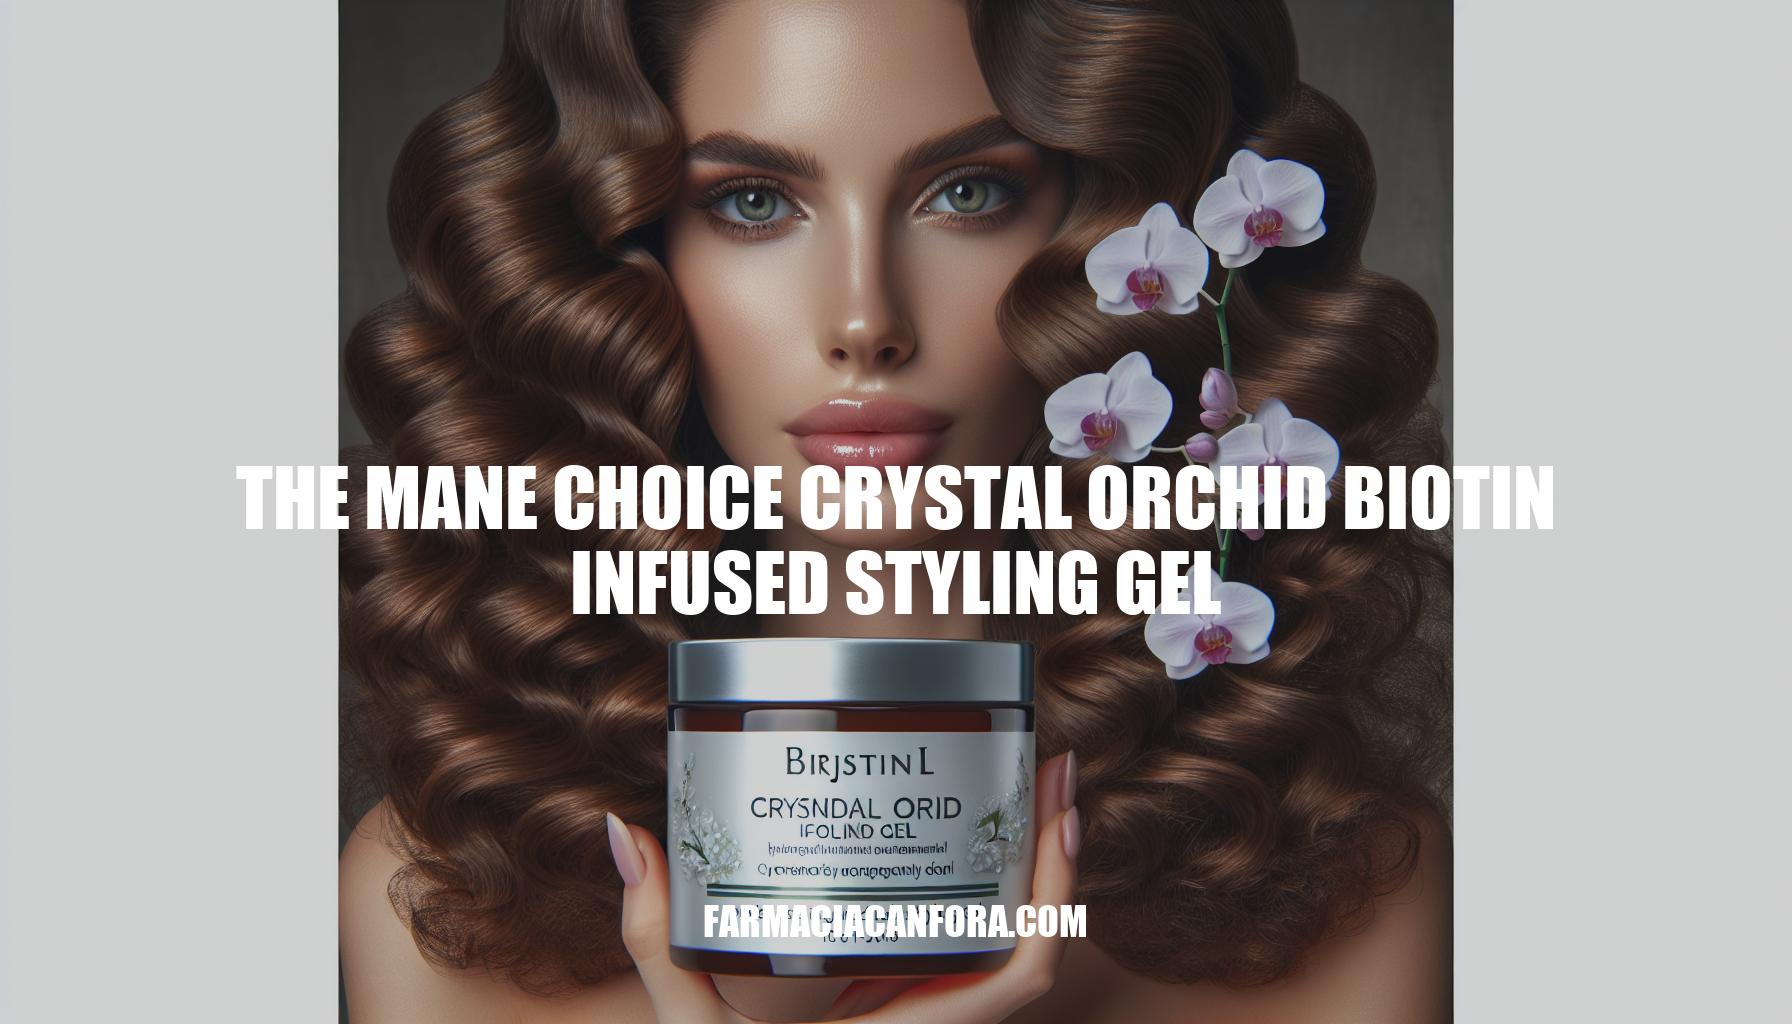 The Mane Choice Crystal Orchid Biotin Infused Styling Gel: Benefits and Styling Tips